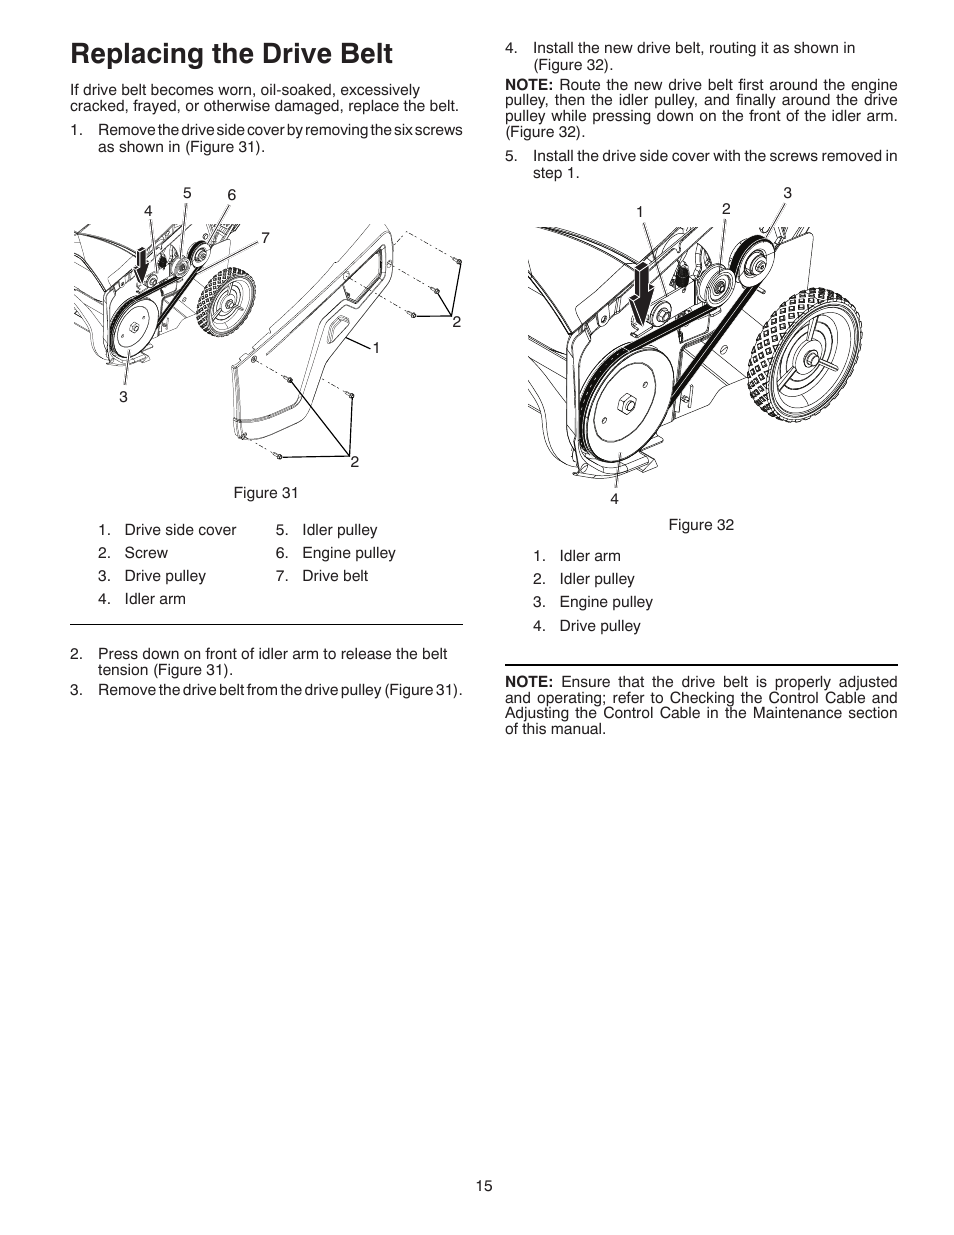 Replacing the drive belt McCulloch 96182000600 User Manual Page 15 / 30.